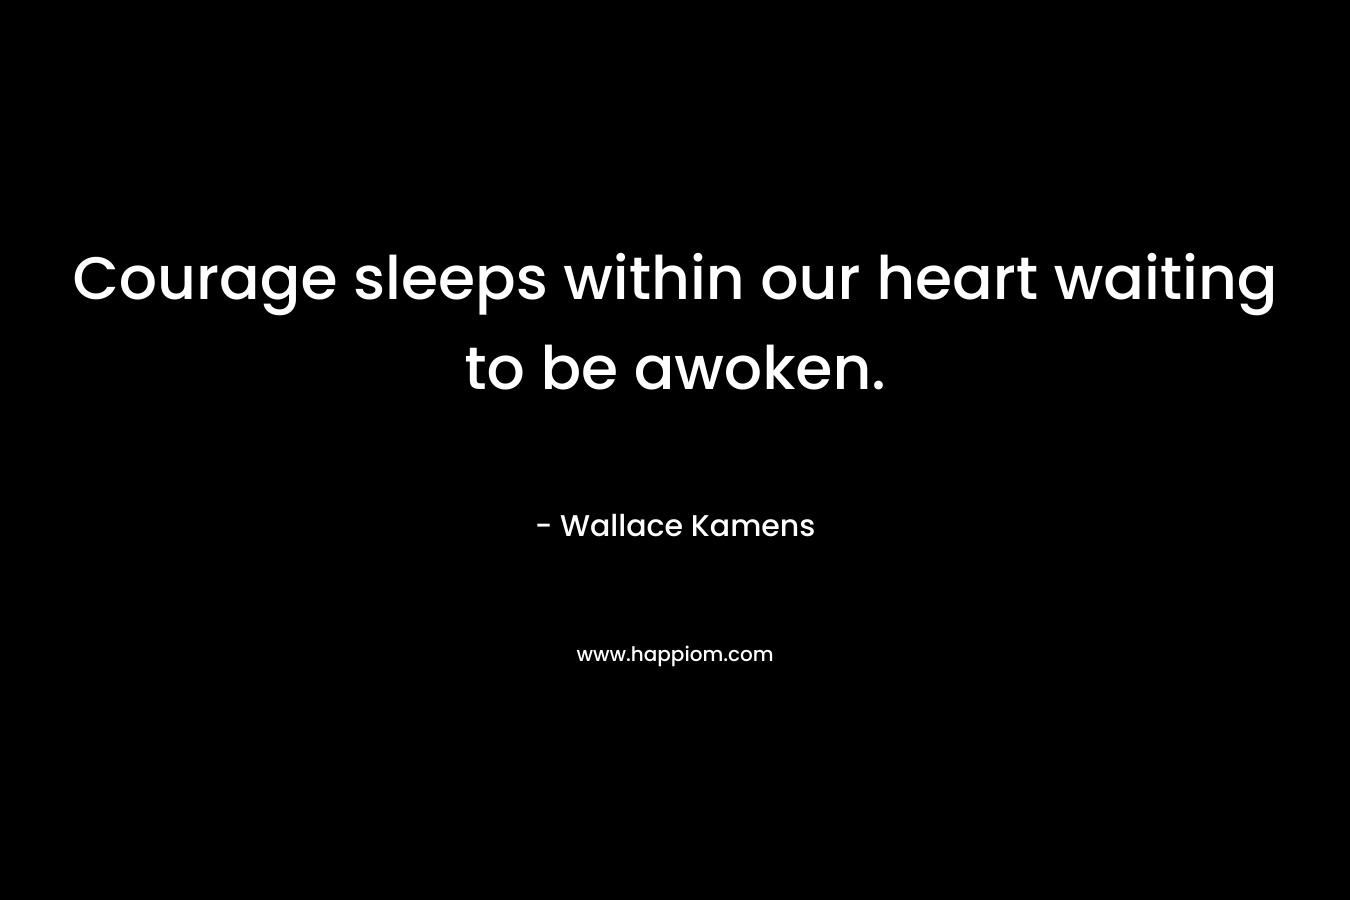 Courage sleeps within our heart waiting to be awoken.